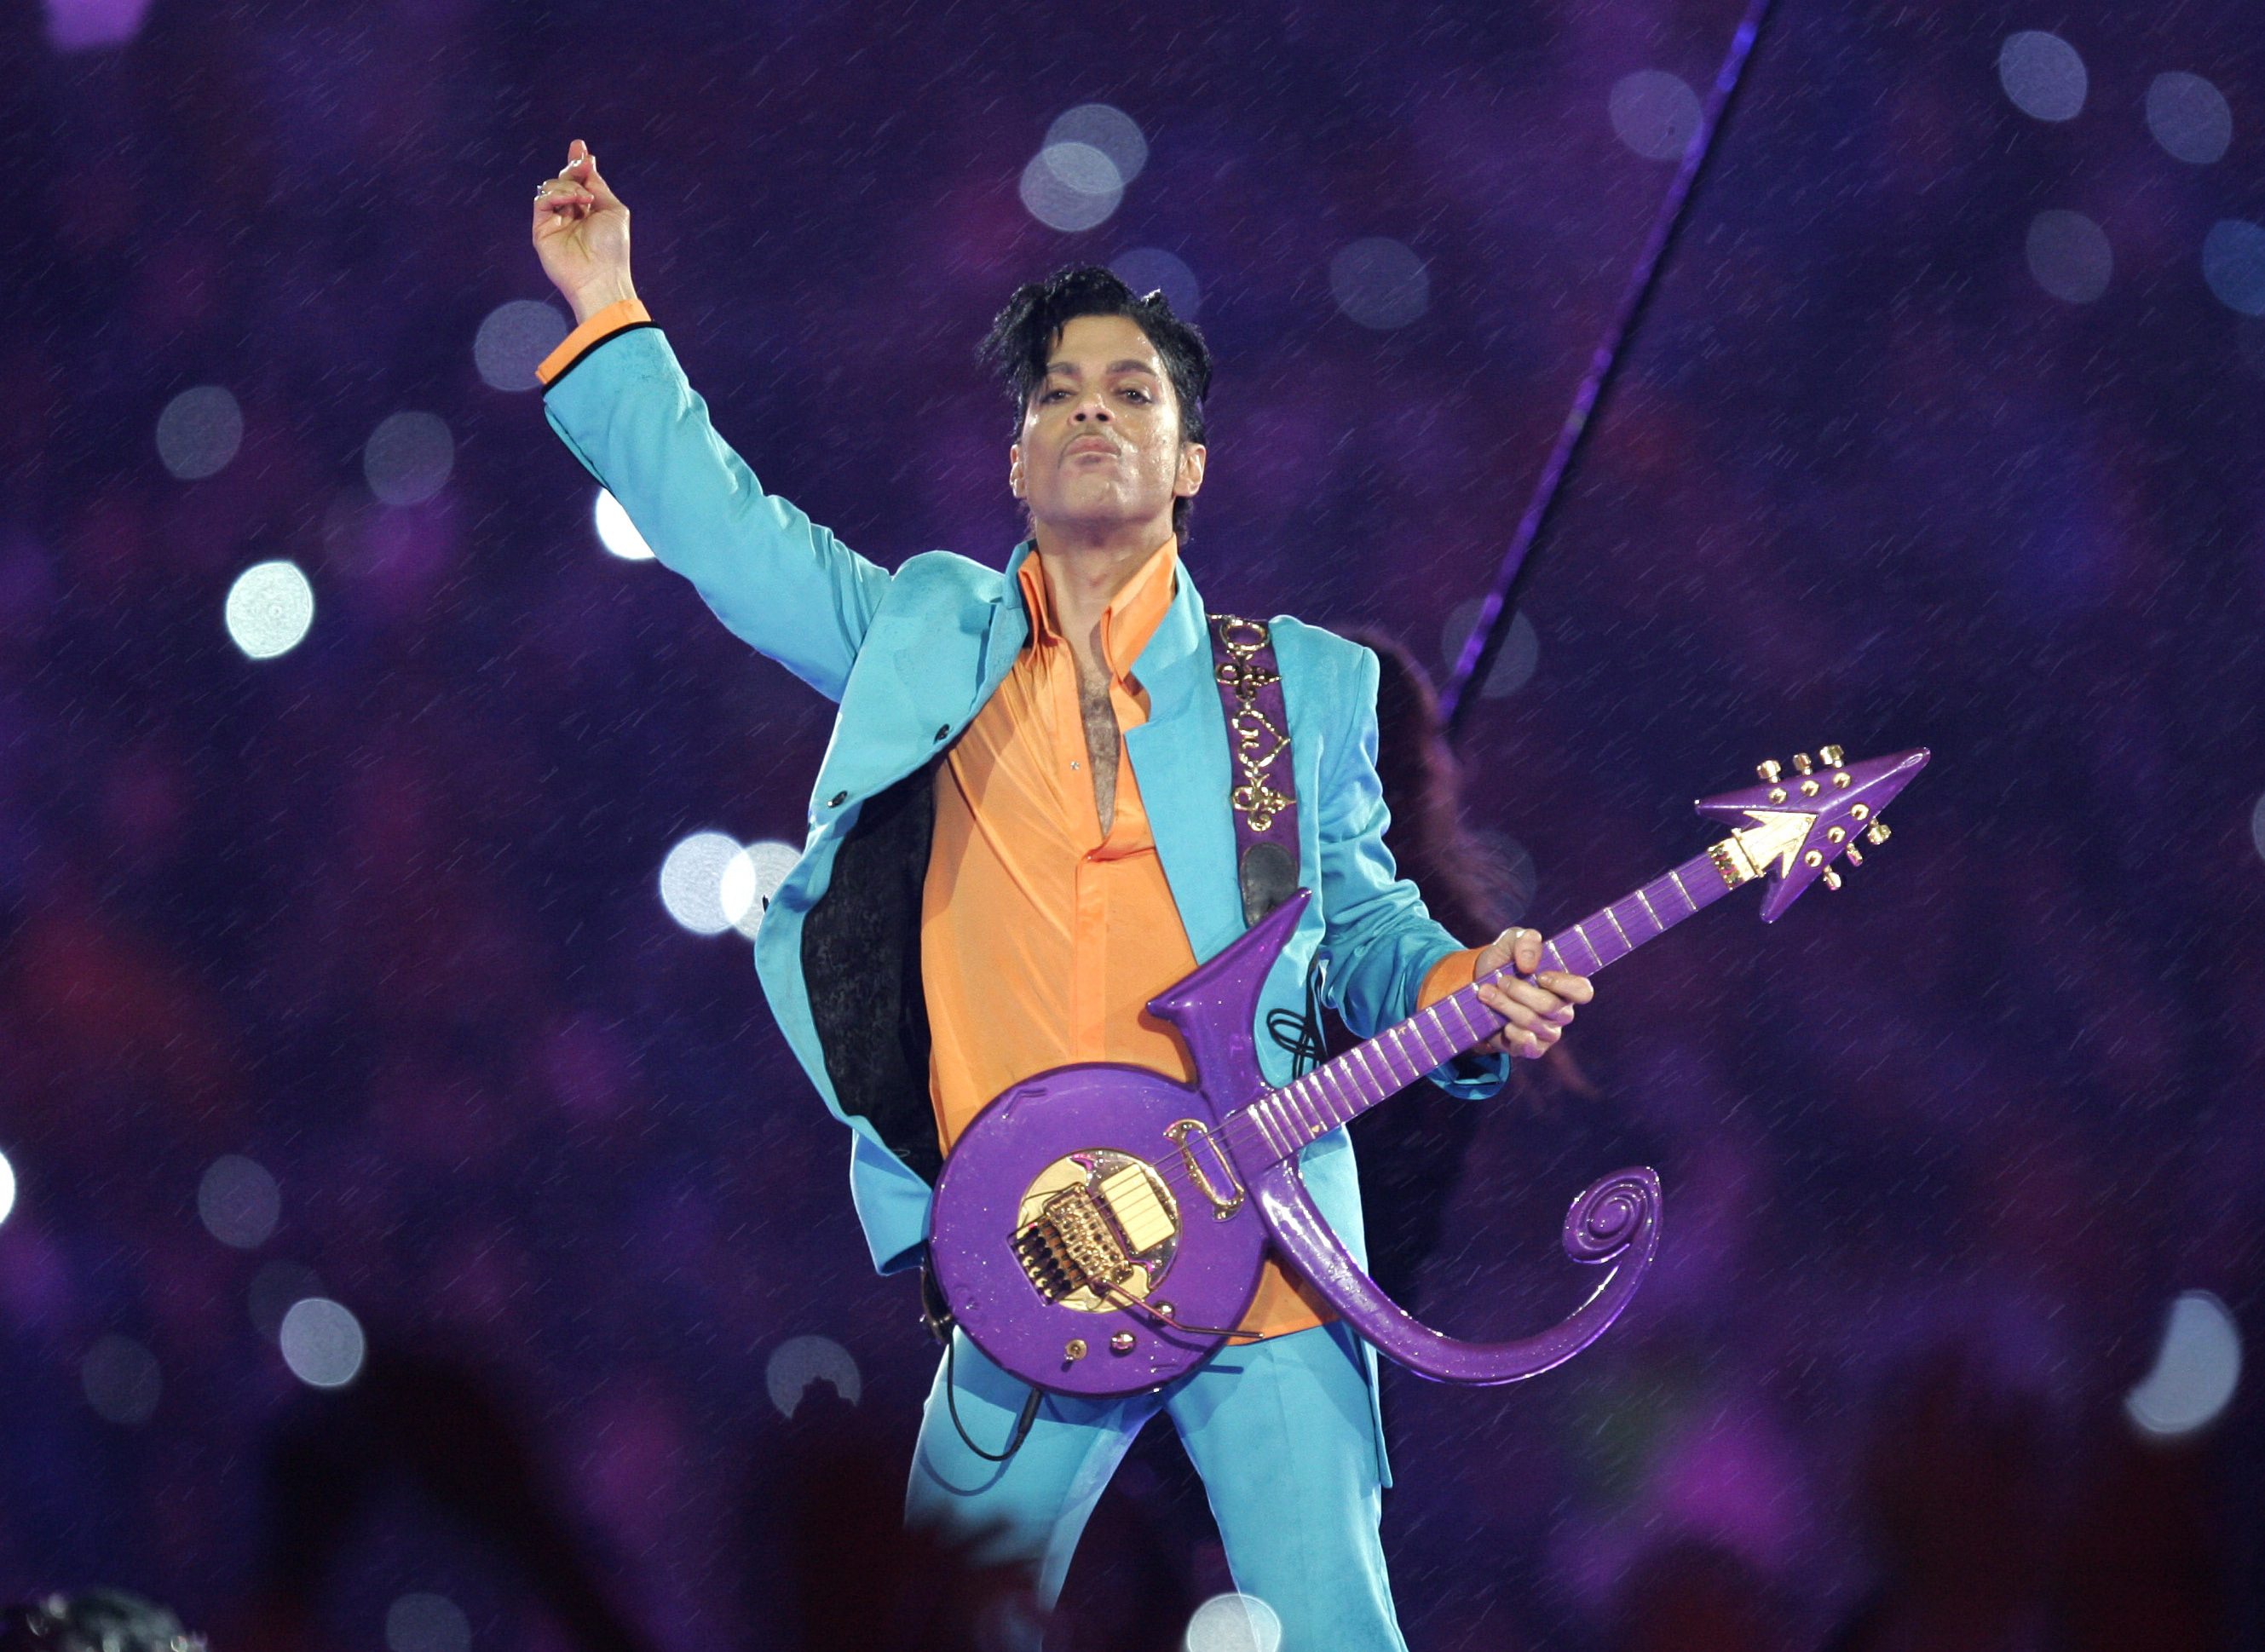 Prince played this Sympol guitar made by Andy Beech during the 2007 Super Bowl halftime show.